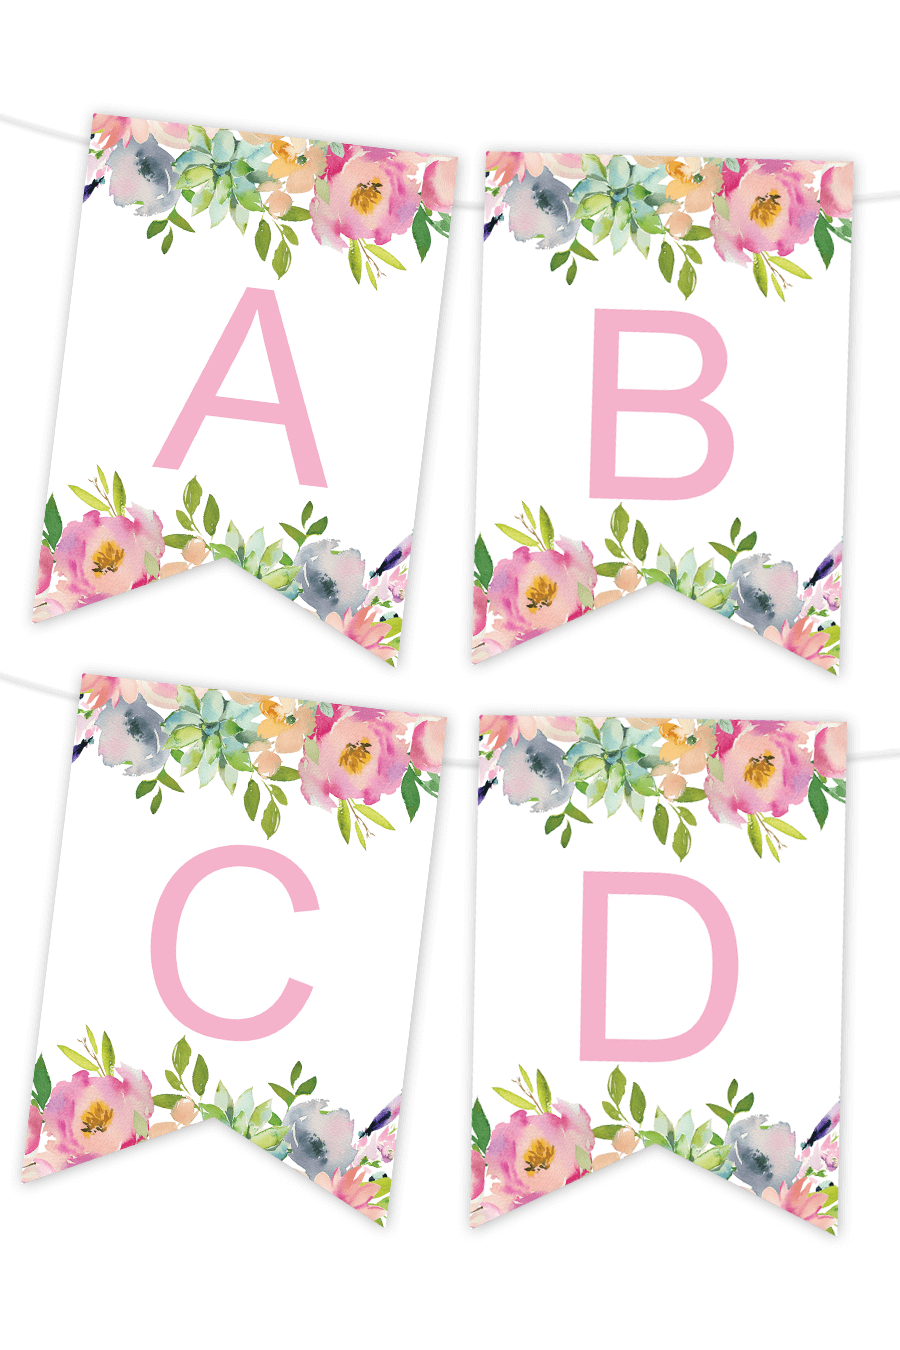 Impertinent Free Printable Banner Templates | Kenzi's Blog With Free Printable Party Banner Templates